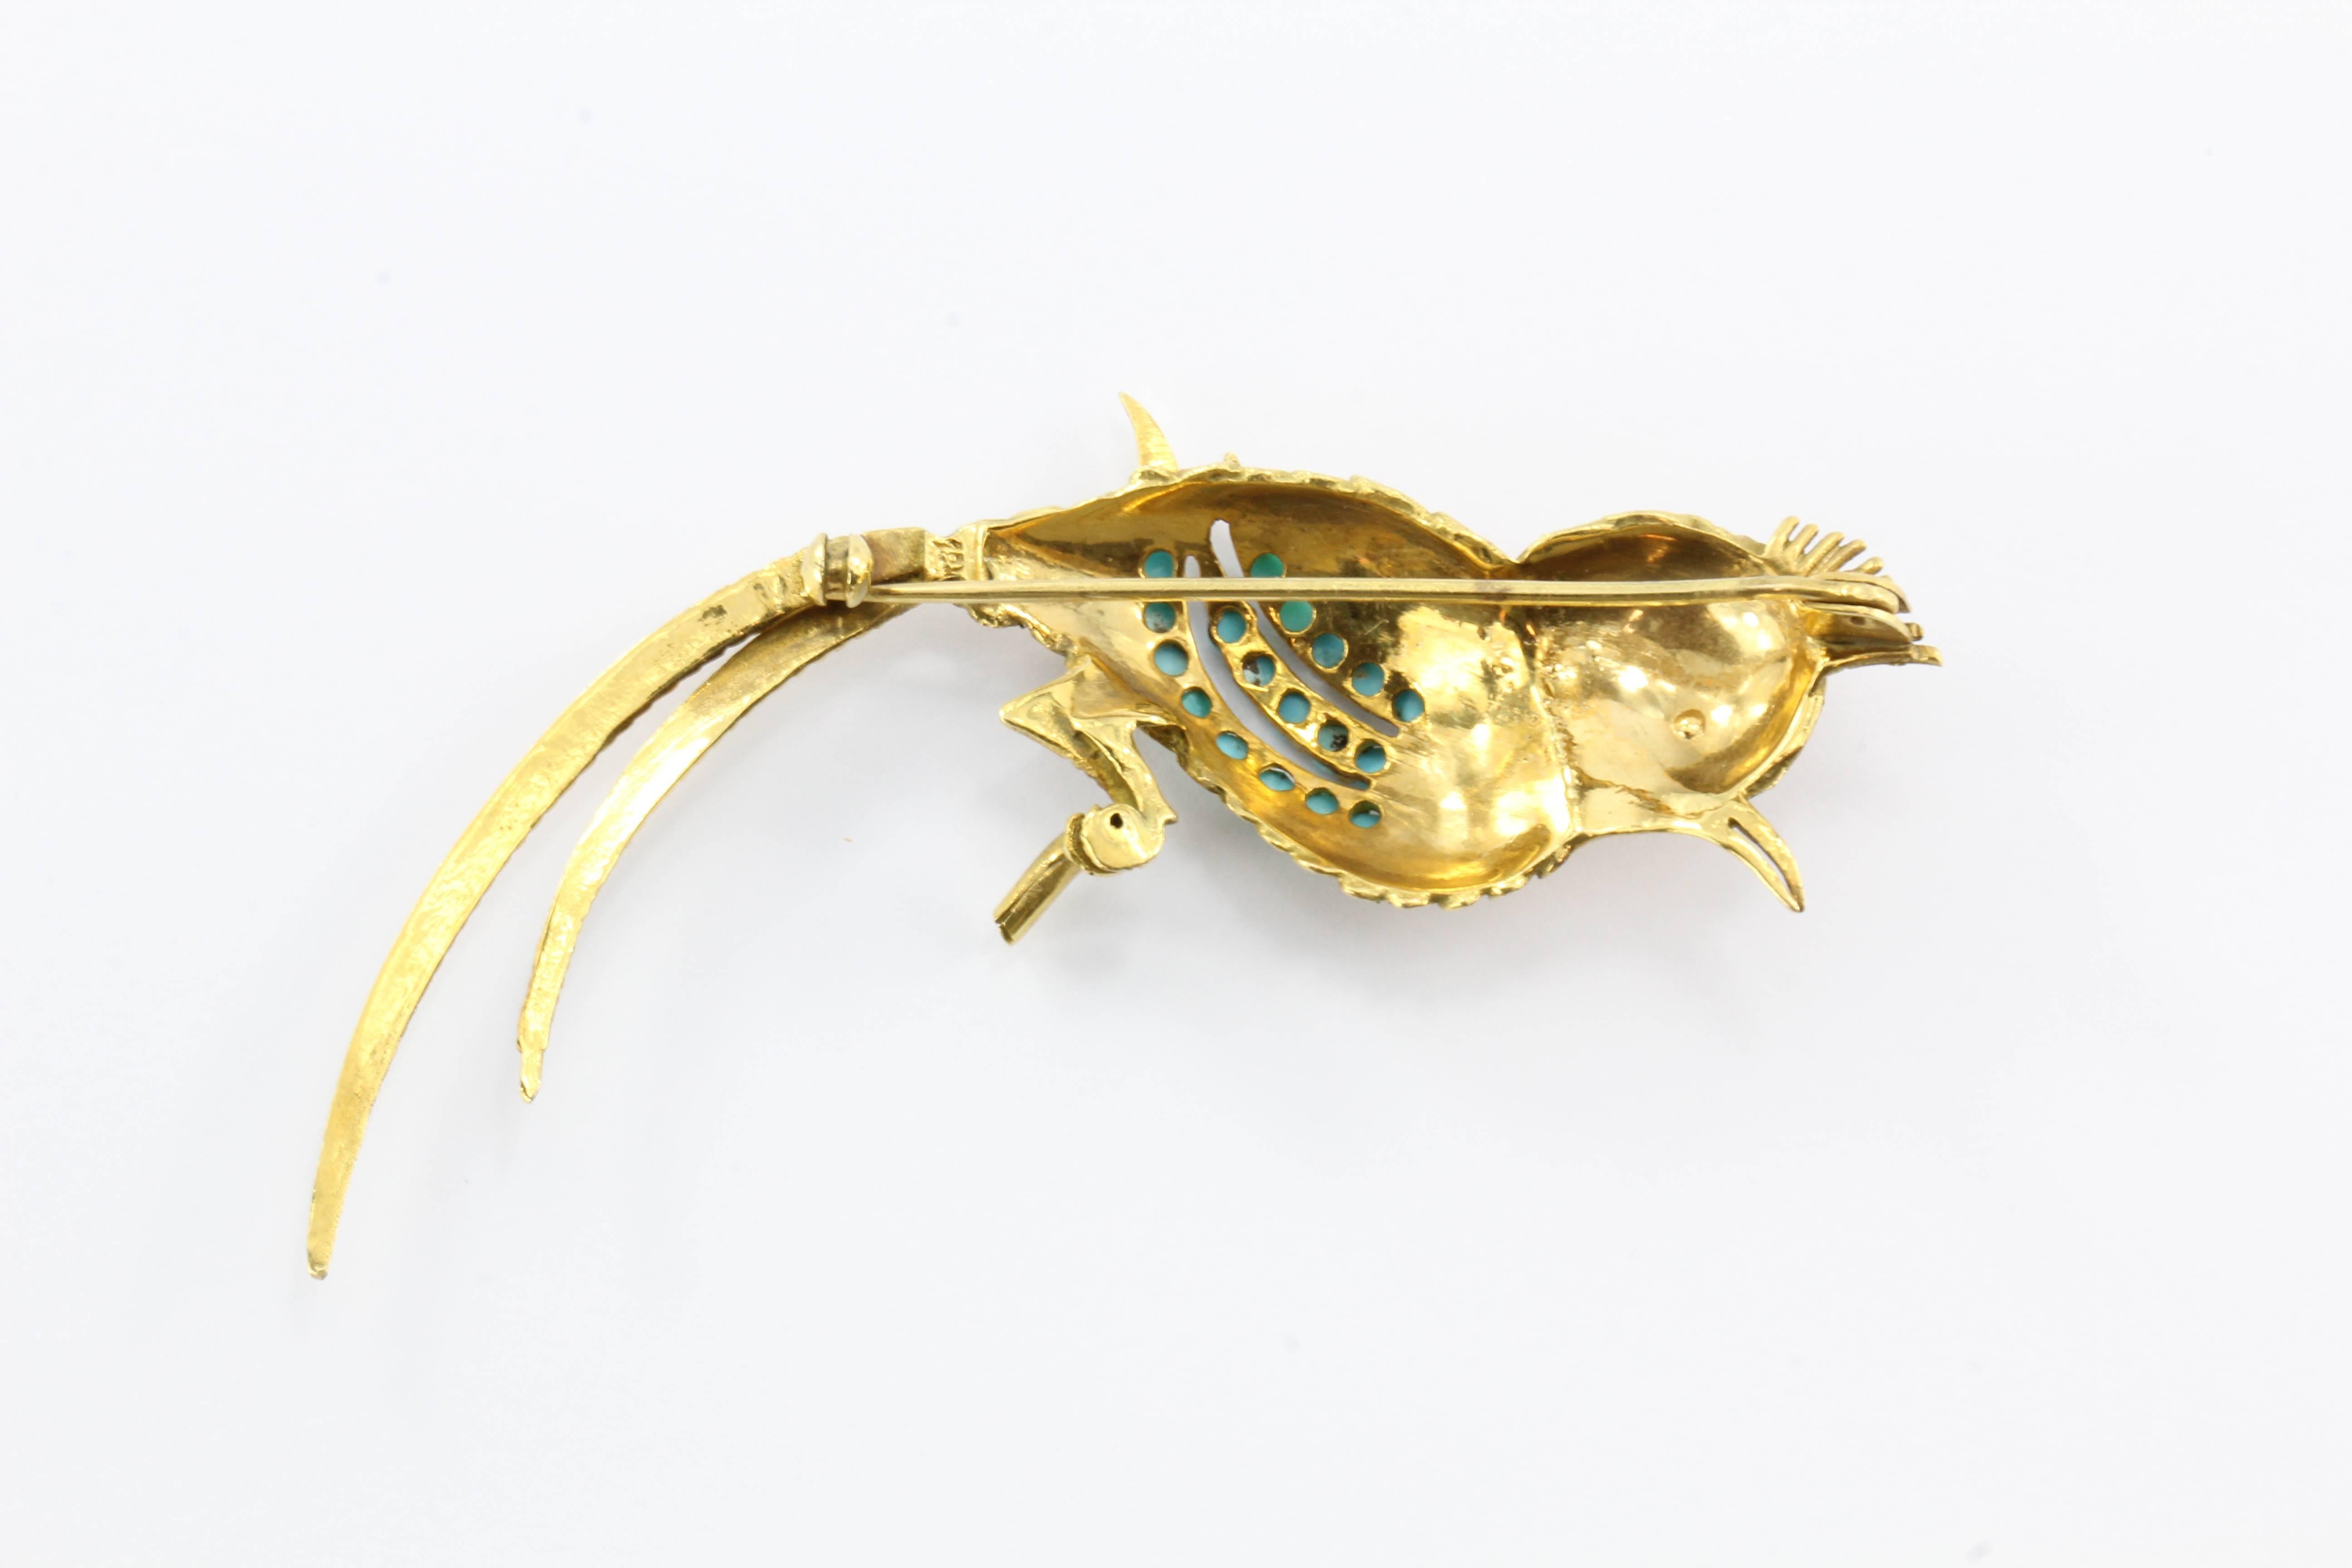 18K Gold Persian Turquoise Bird of Paradise Brooch. The piece is in great antique estate condition and ready to wear. The clasp for the pin closure is missing, though. It is hallmarked 18K. The piece is set with 18 cabochons of Persian turquoise. It